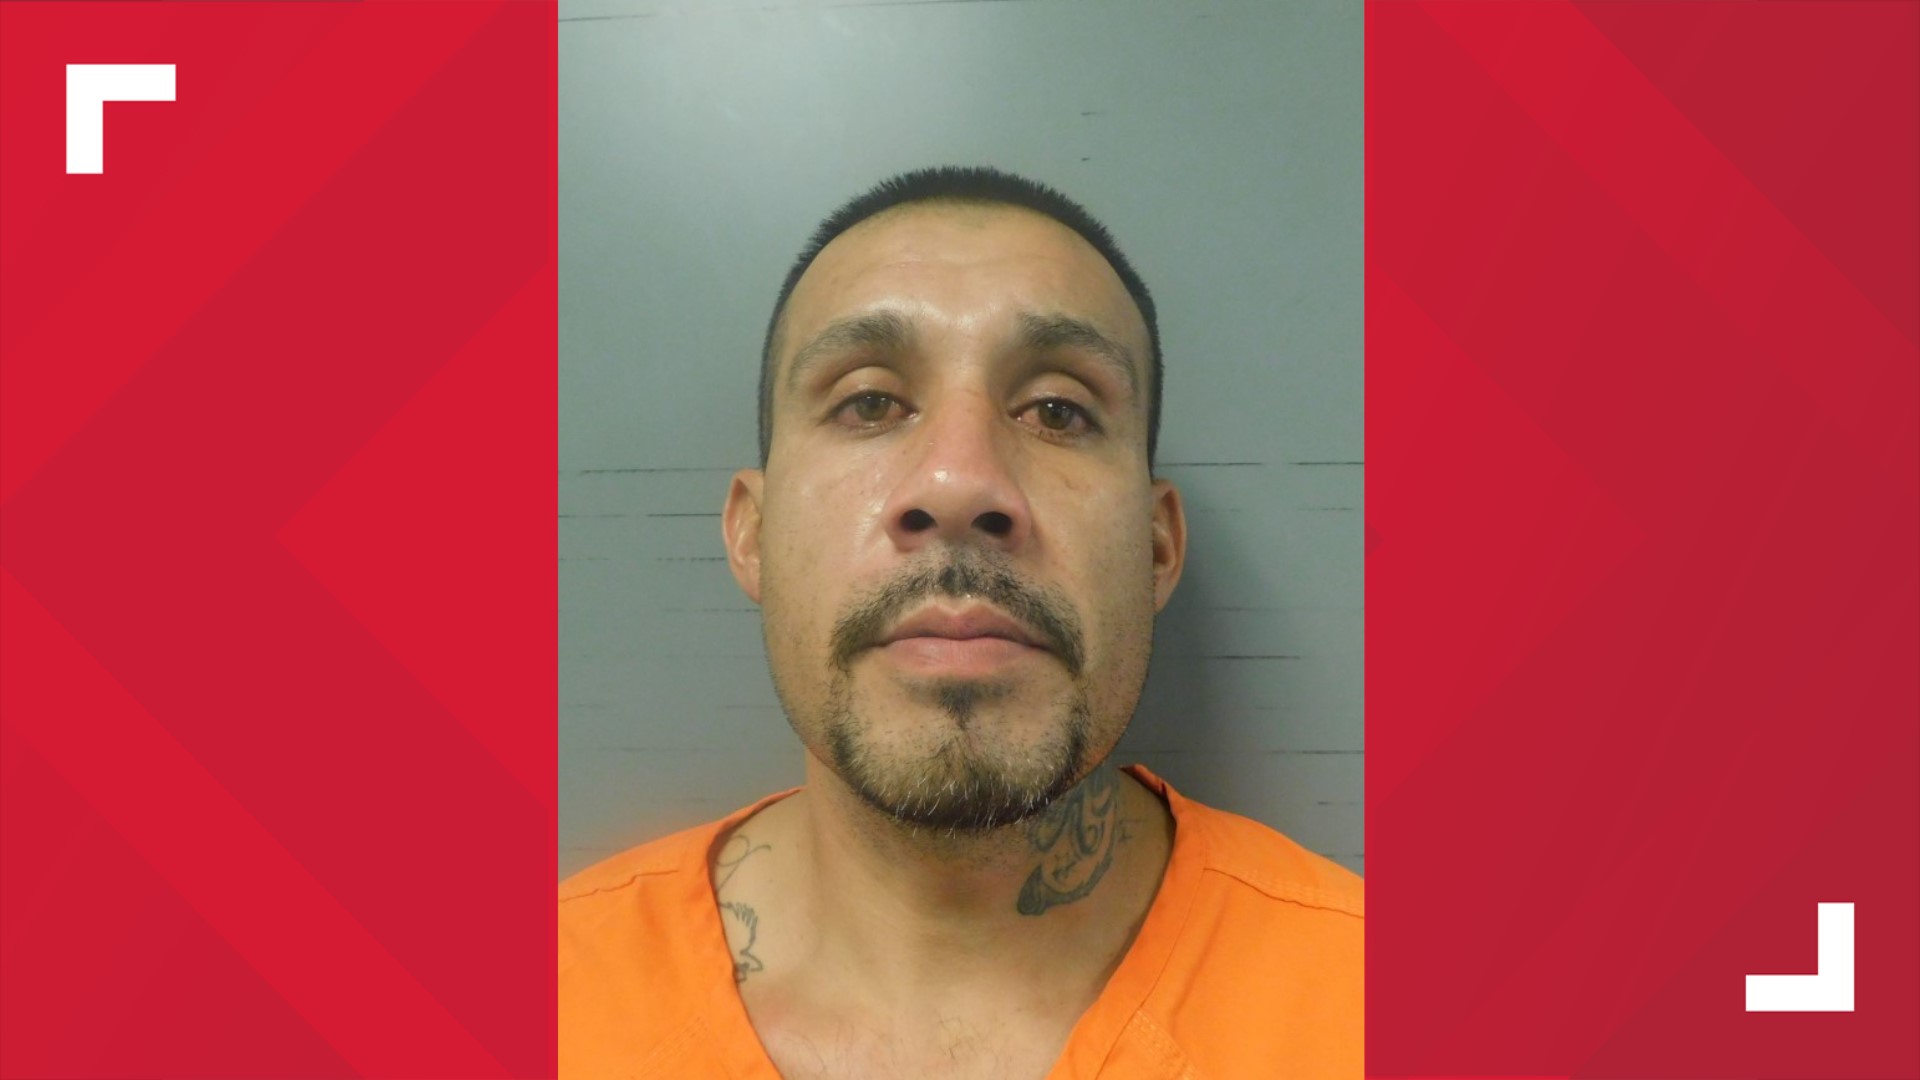 Sergio Antonio Cerna has been arrested and charged with capital murder for burning 25-year-old Saffire M. Armenta.